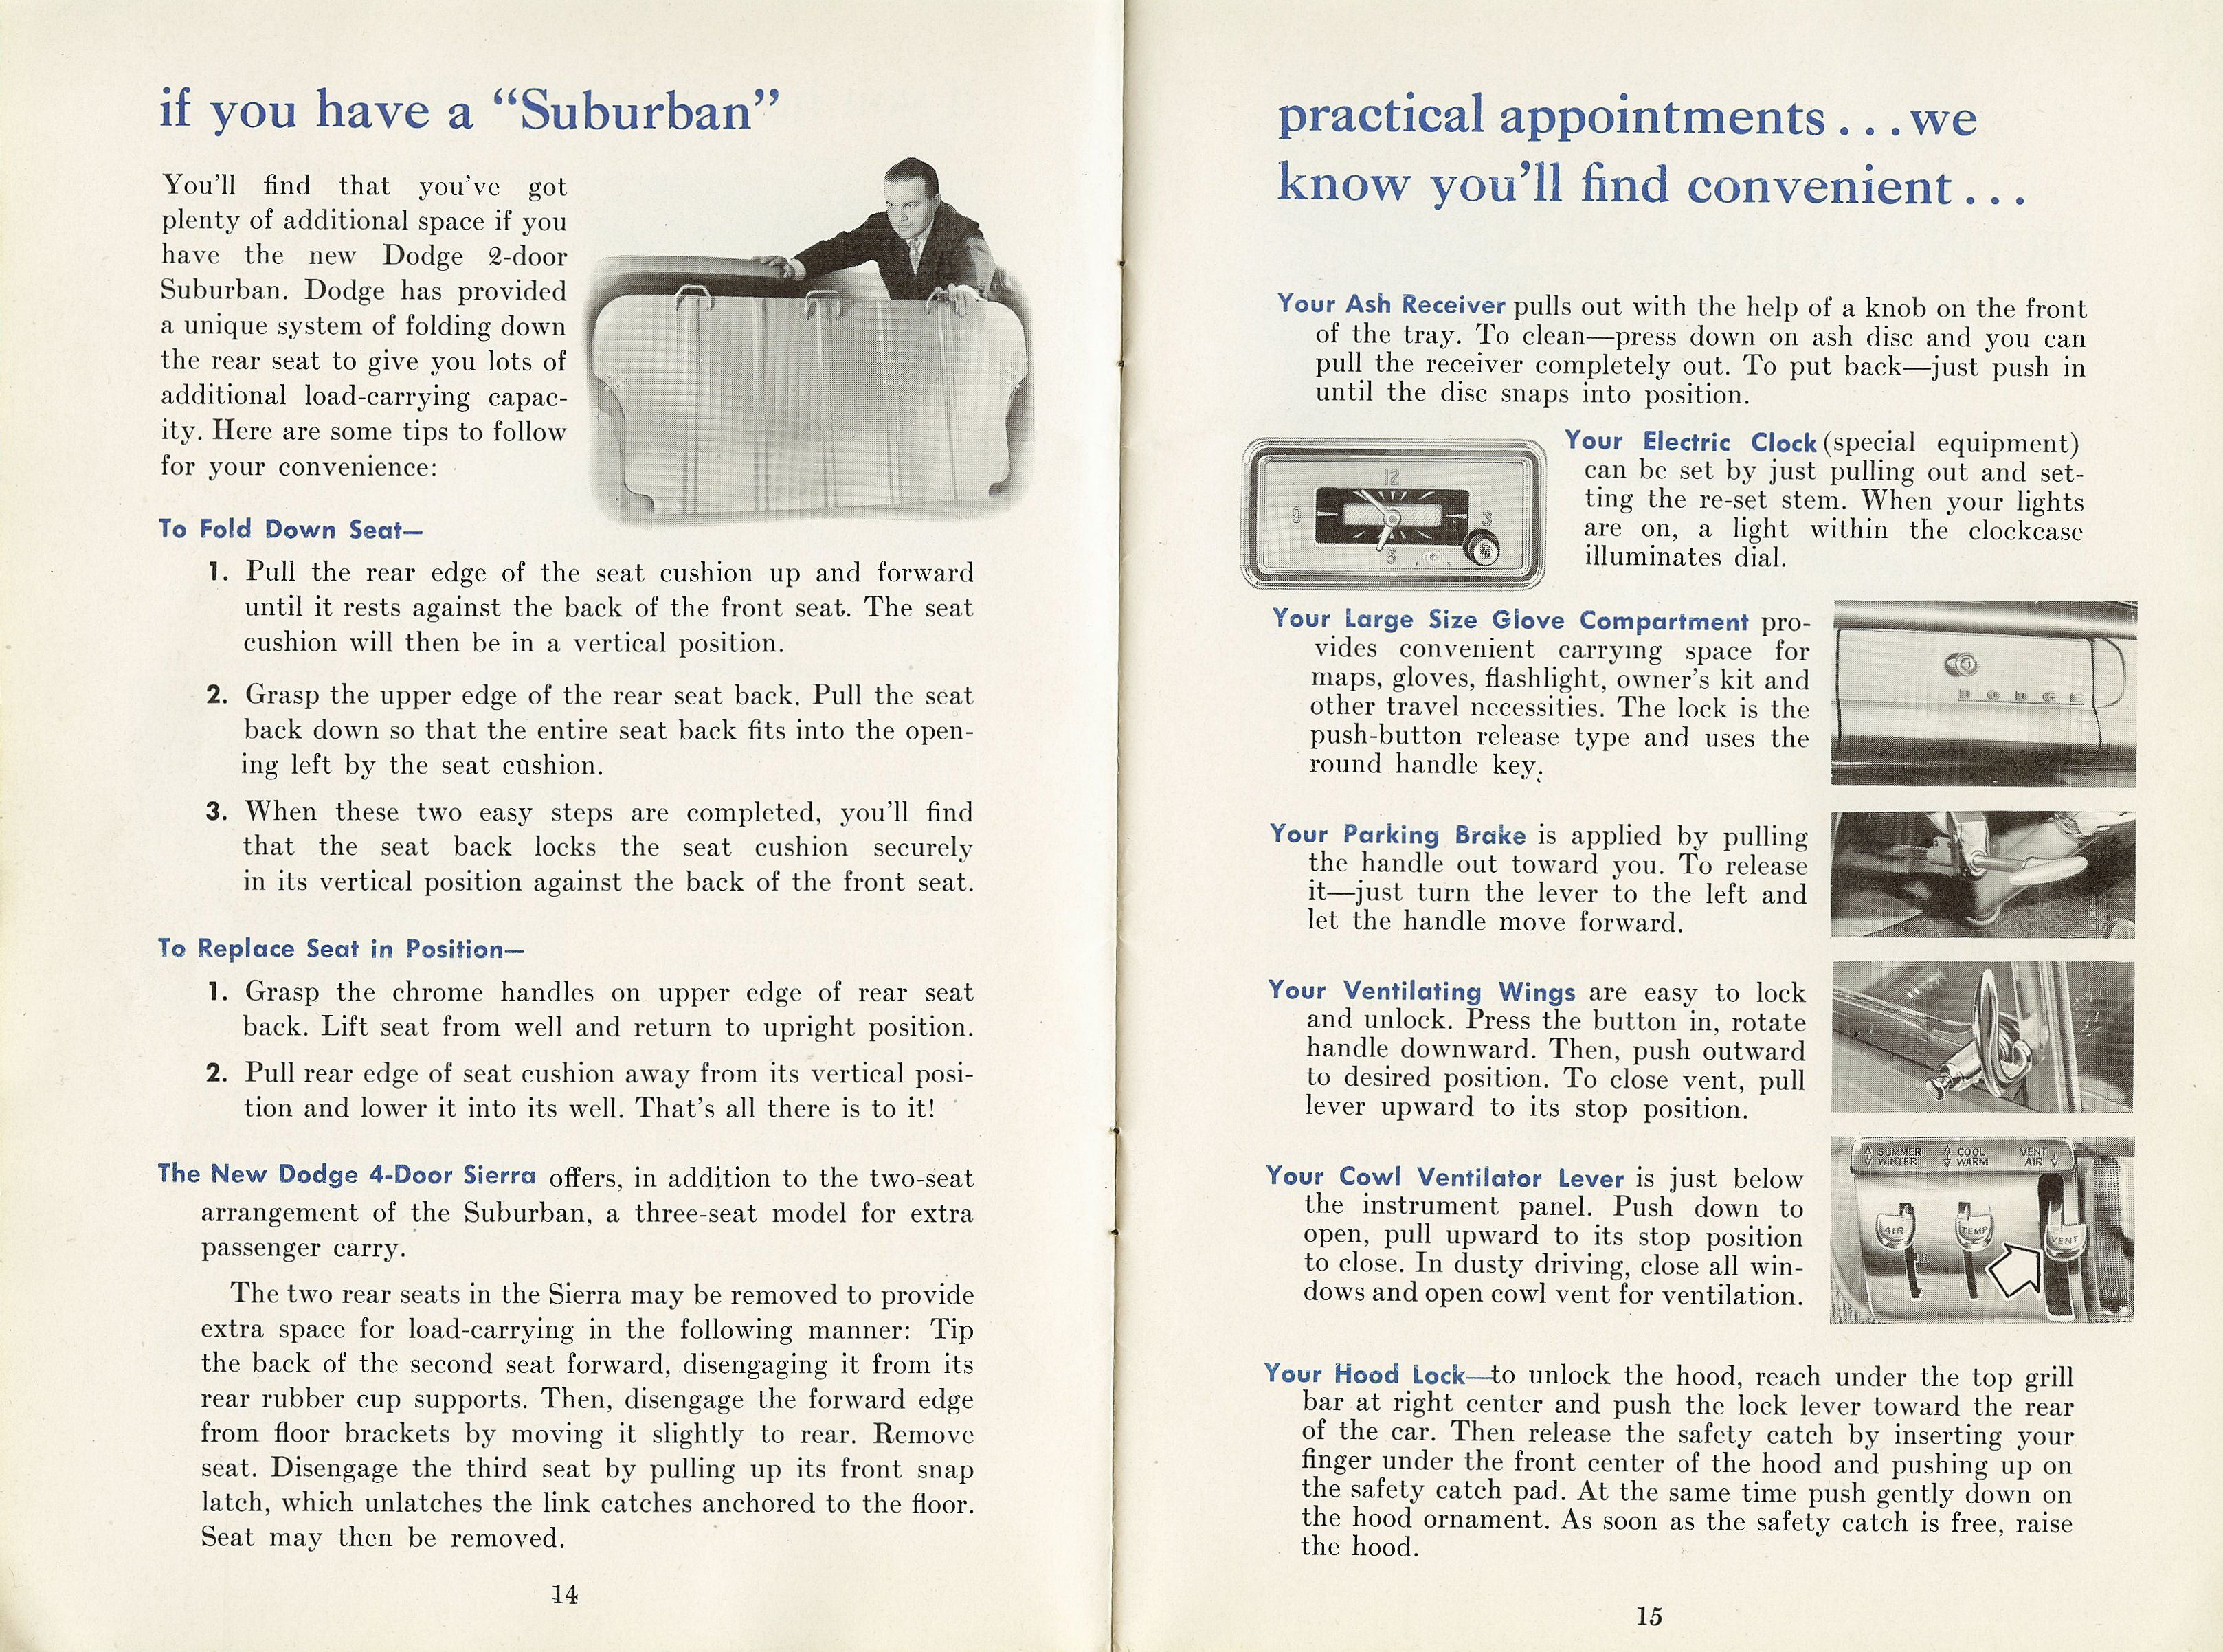 1954 Dodge Car Owners Manual Page 11